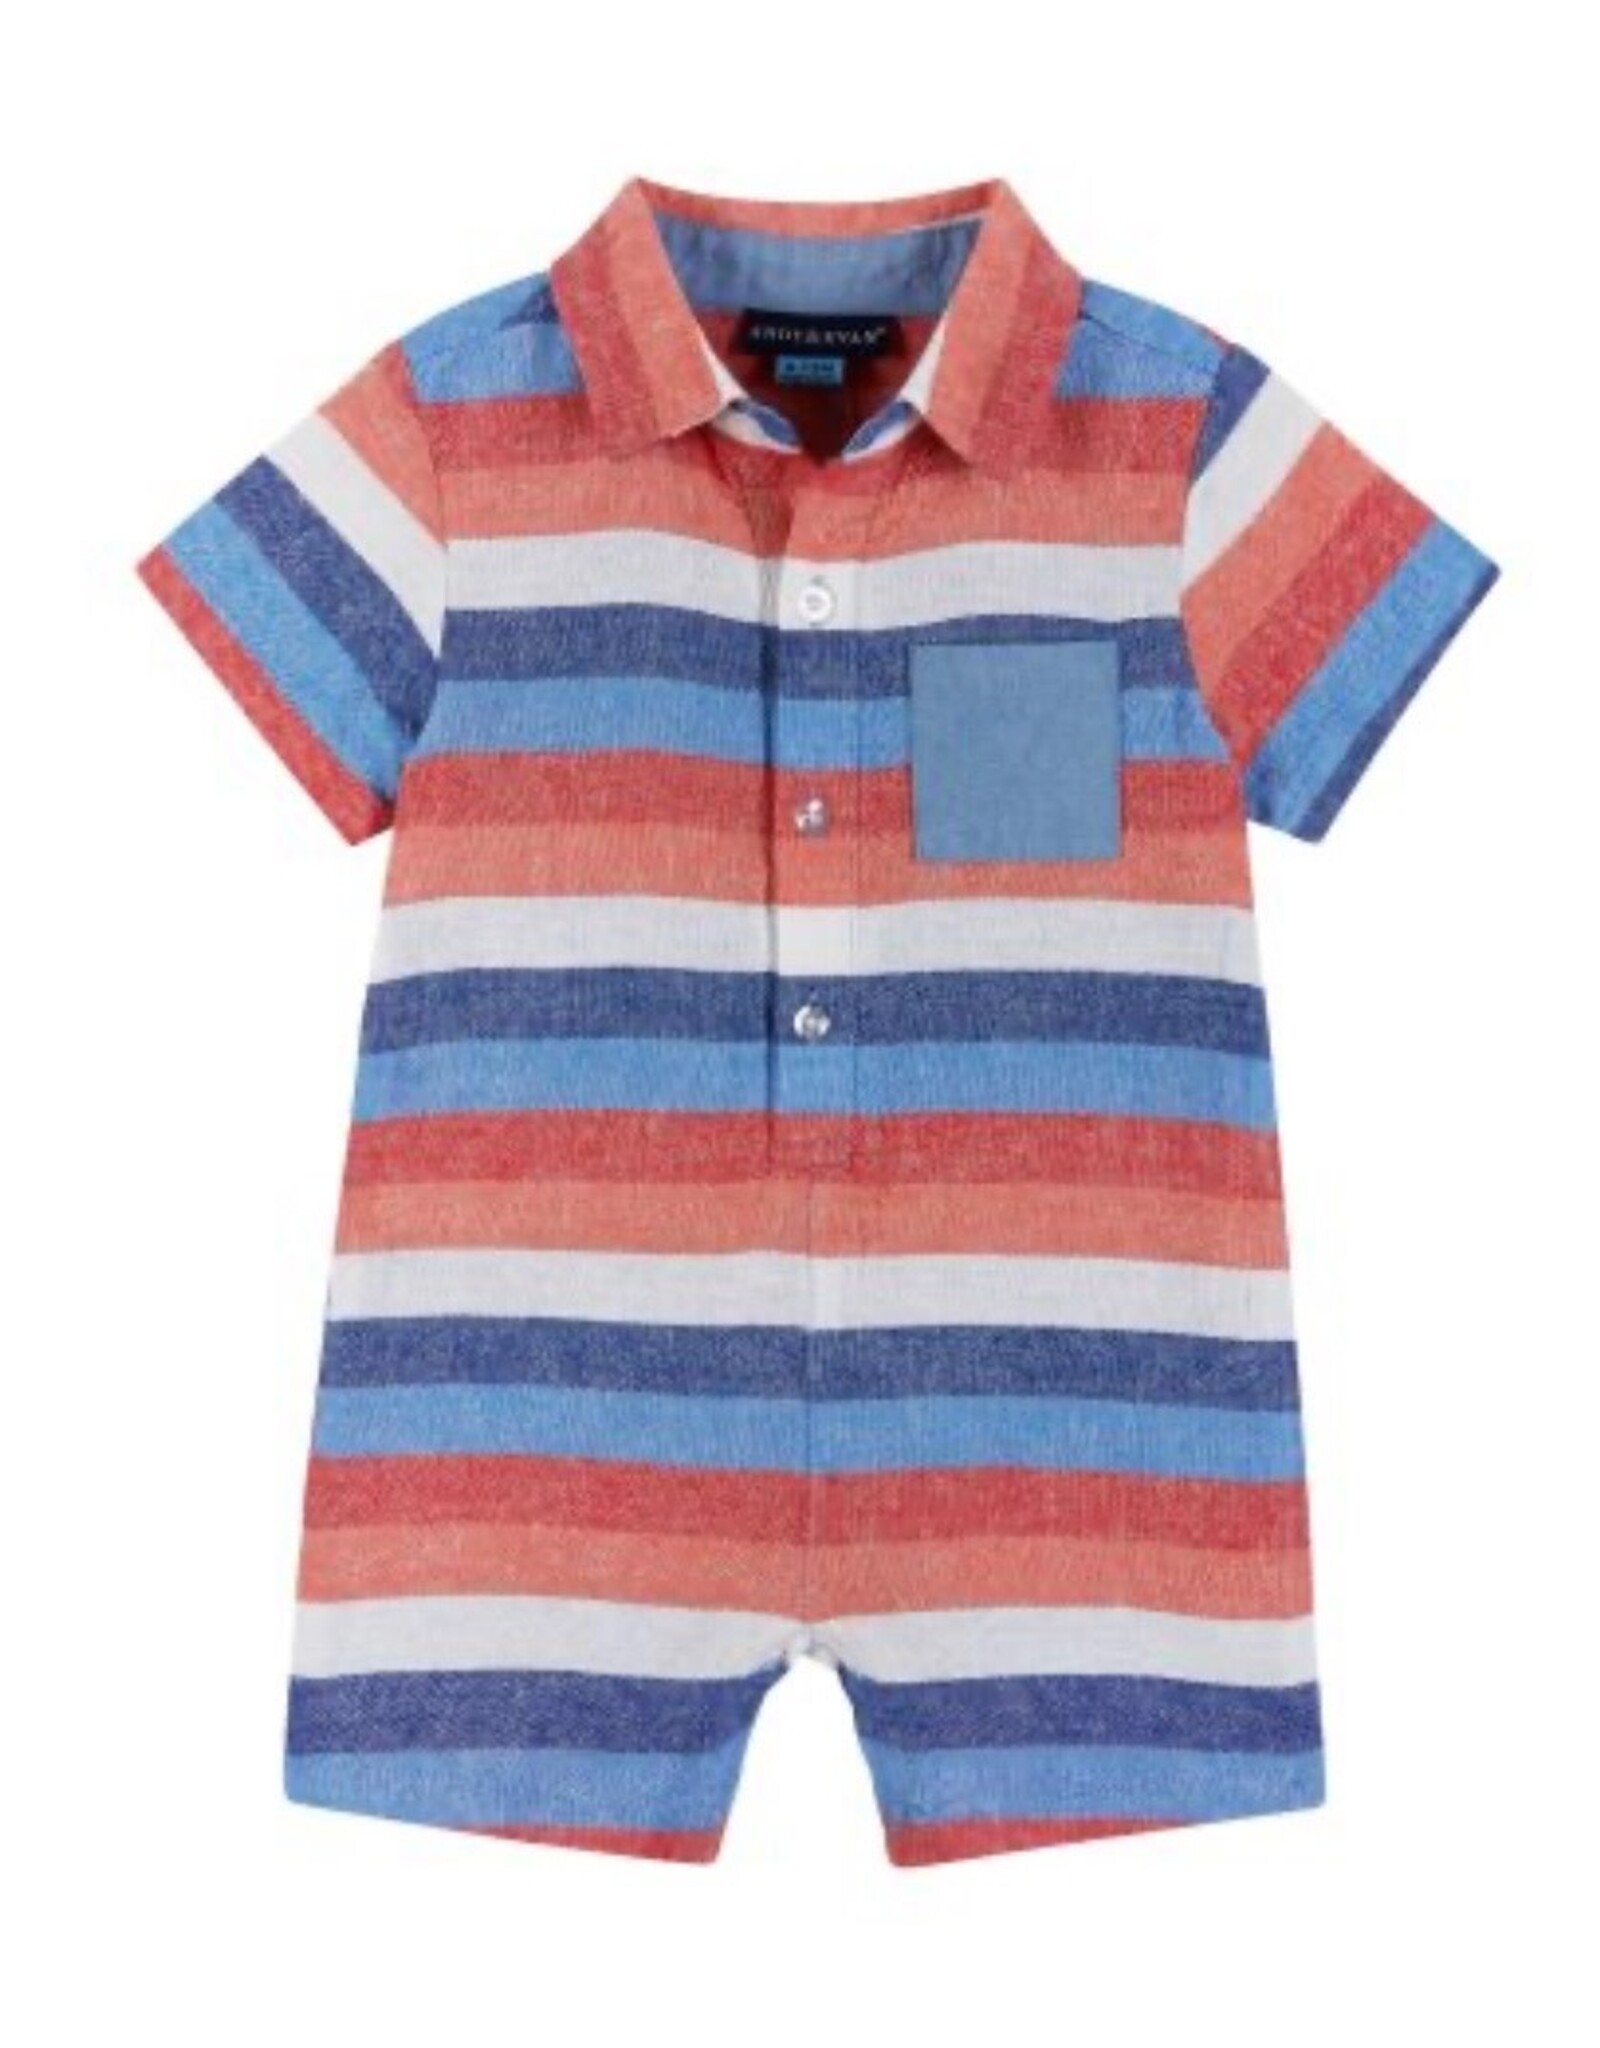 Andy & Evan Andy & Evan- Red/White/Blue/Navy Chambray Striped Romper